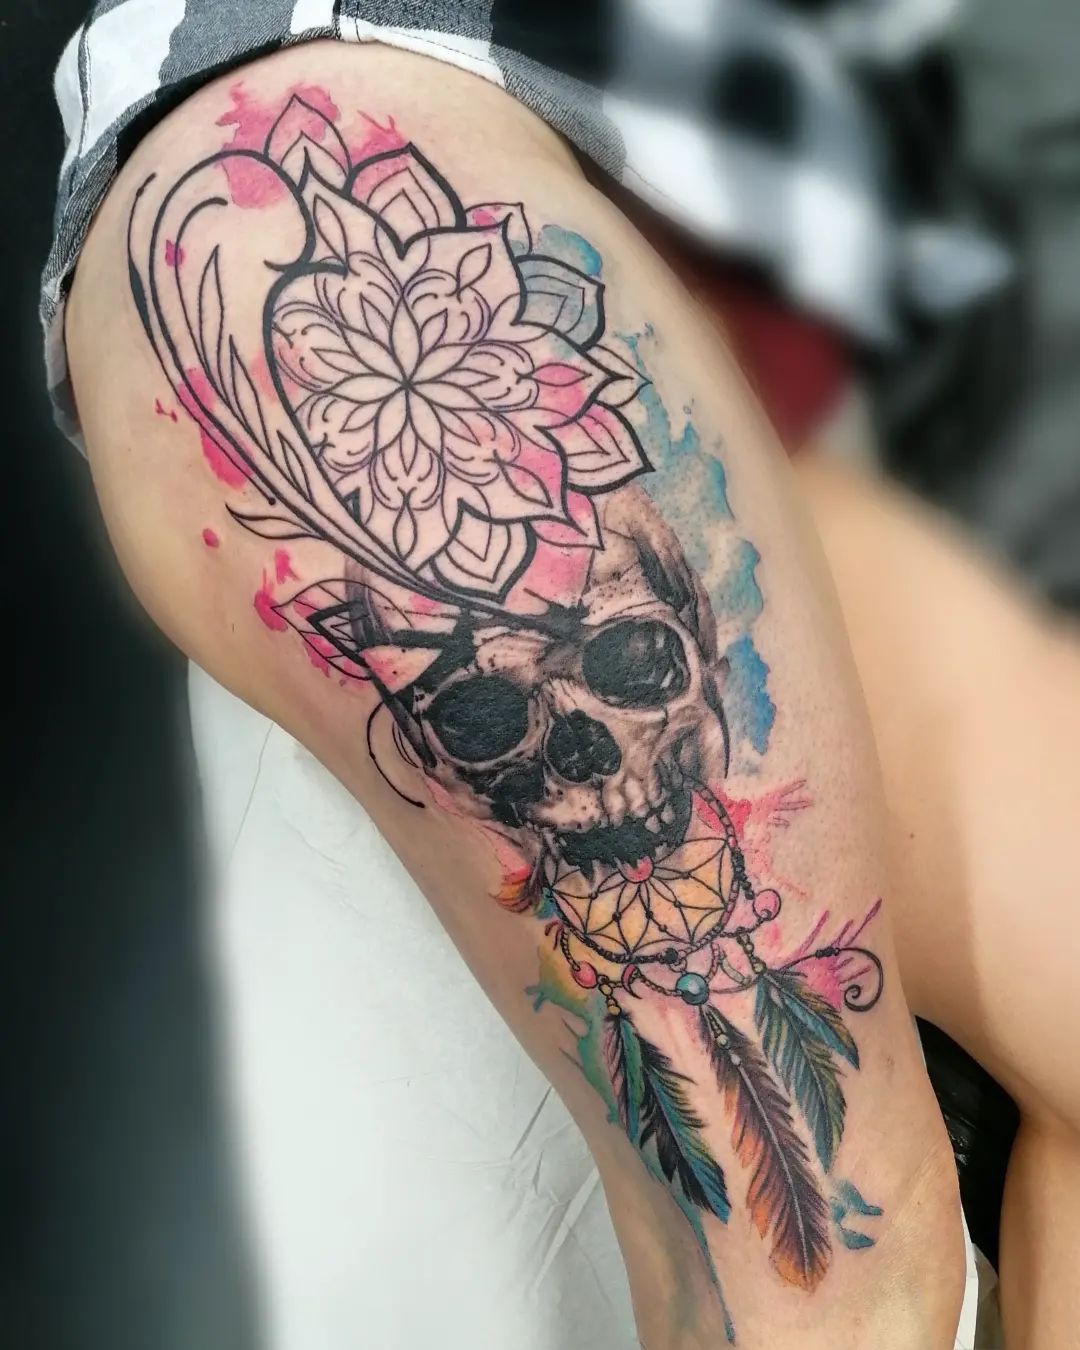 The Dream Catcher with a skull tattoo is just one different version of this ancient symbol—and it can be seen as a way to honor or commemorate someone who has passed away. The colors and the water color splash look fabulous.